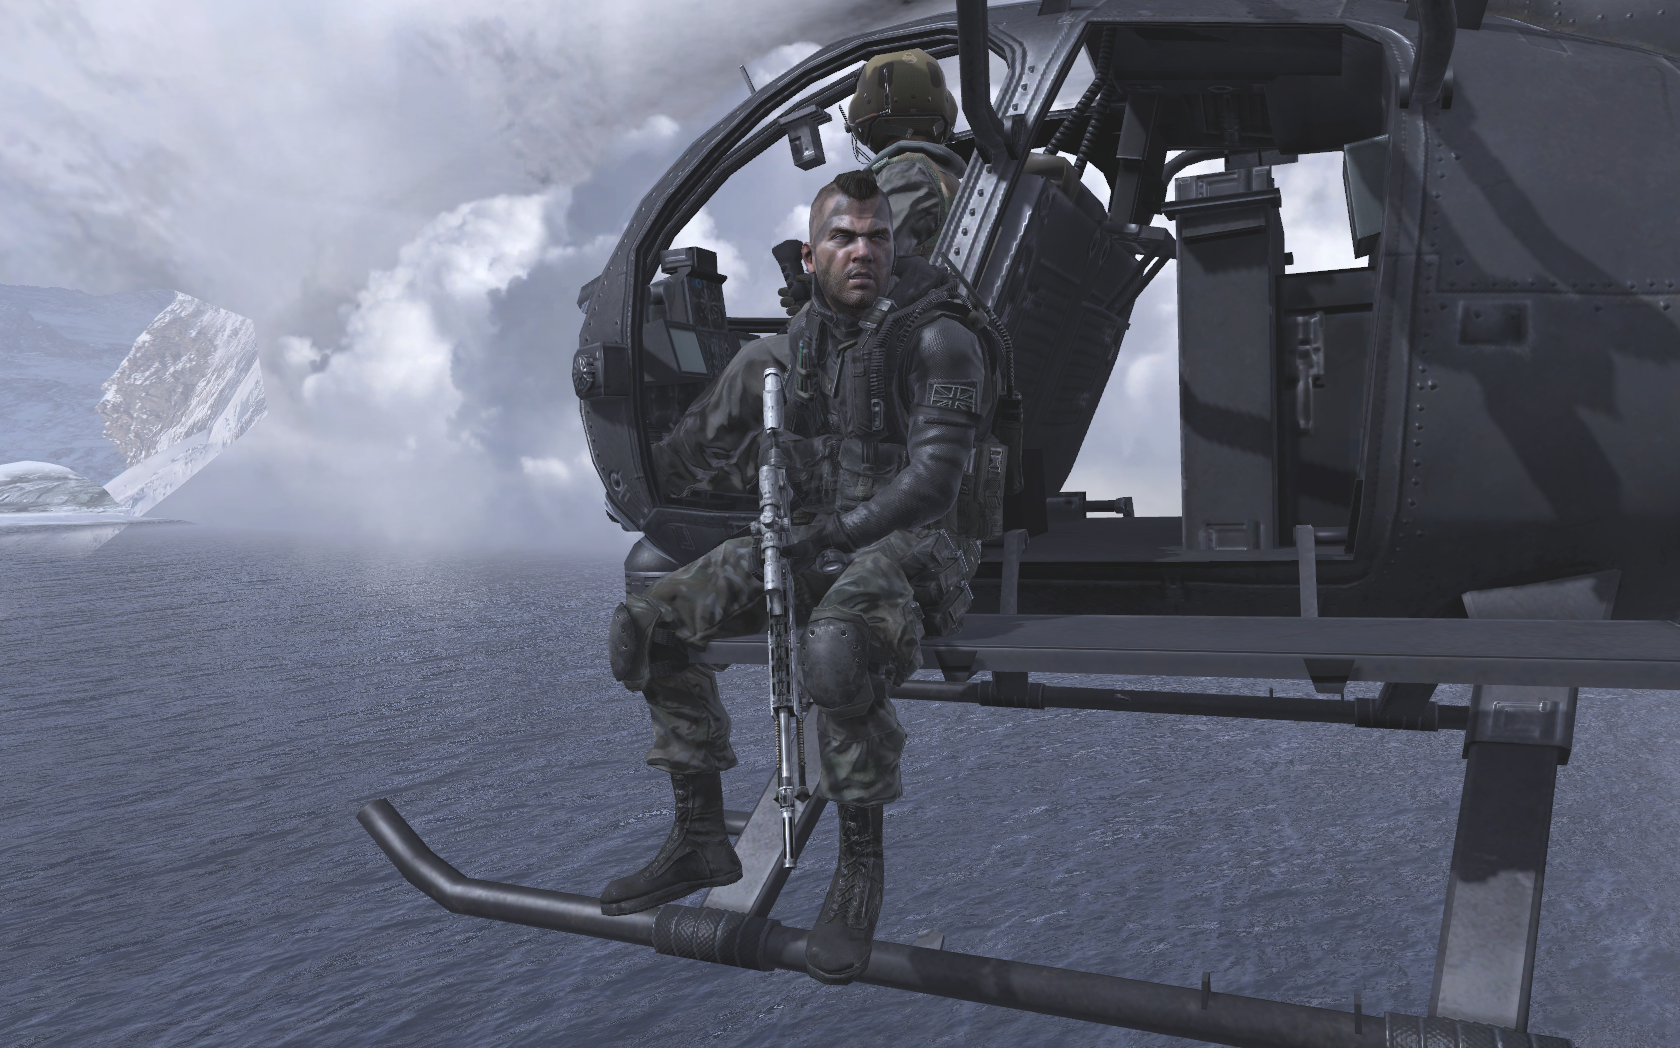 My favorite video game character, Soap Mactavish. Roman Catholic and served in the British SAS and Task Force 141